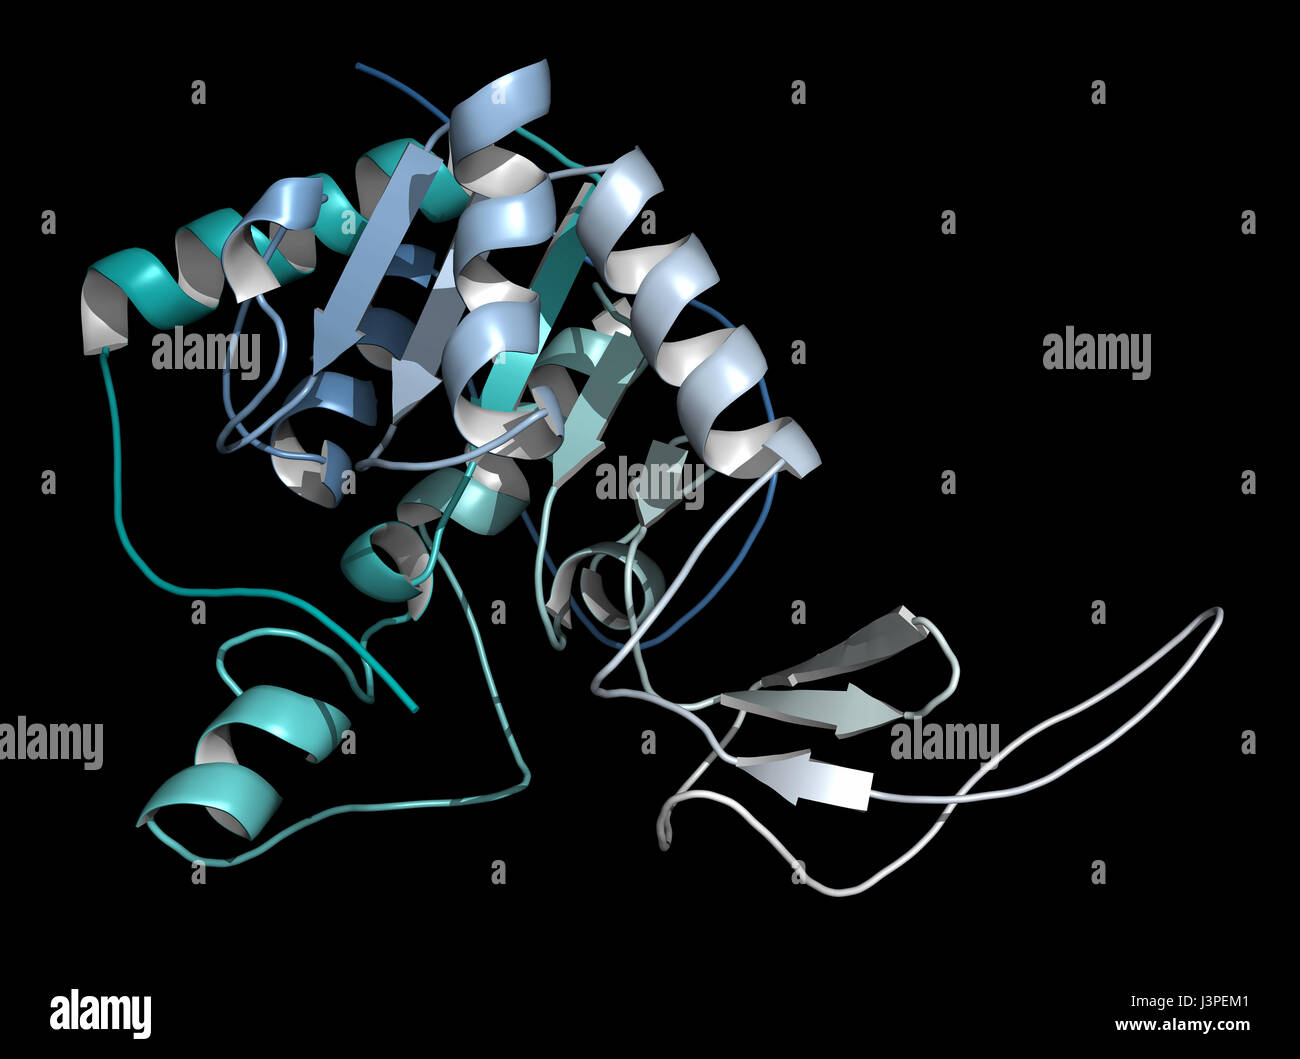 Sirtuin 6 (SIRT6) protein. Linked to longevity in mammals. Cartoon representation. N-to-C gradient coloring. Stock Photo